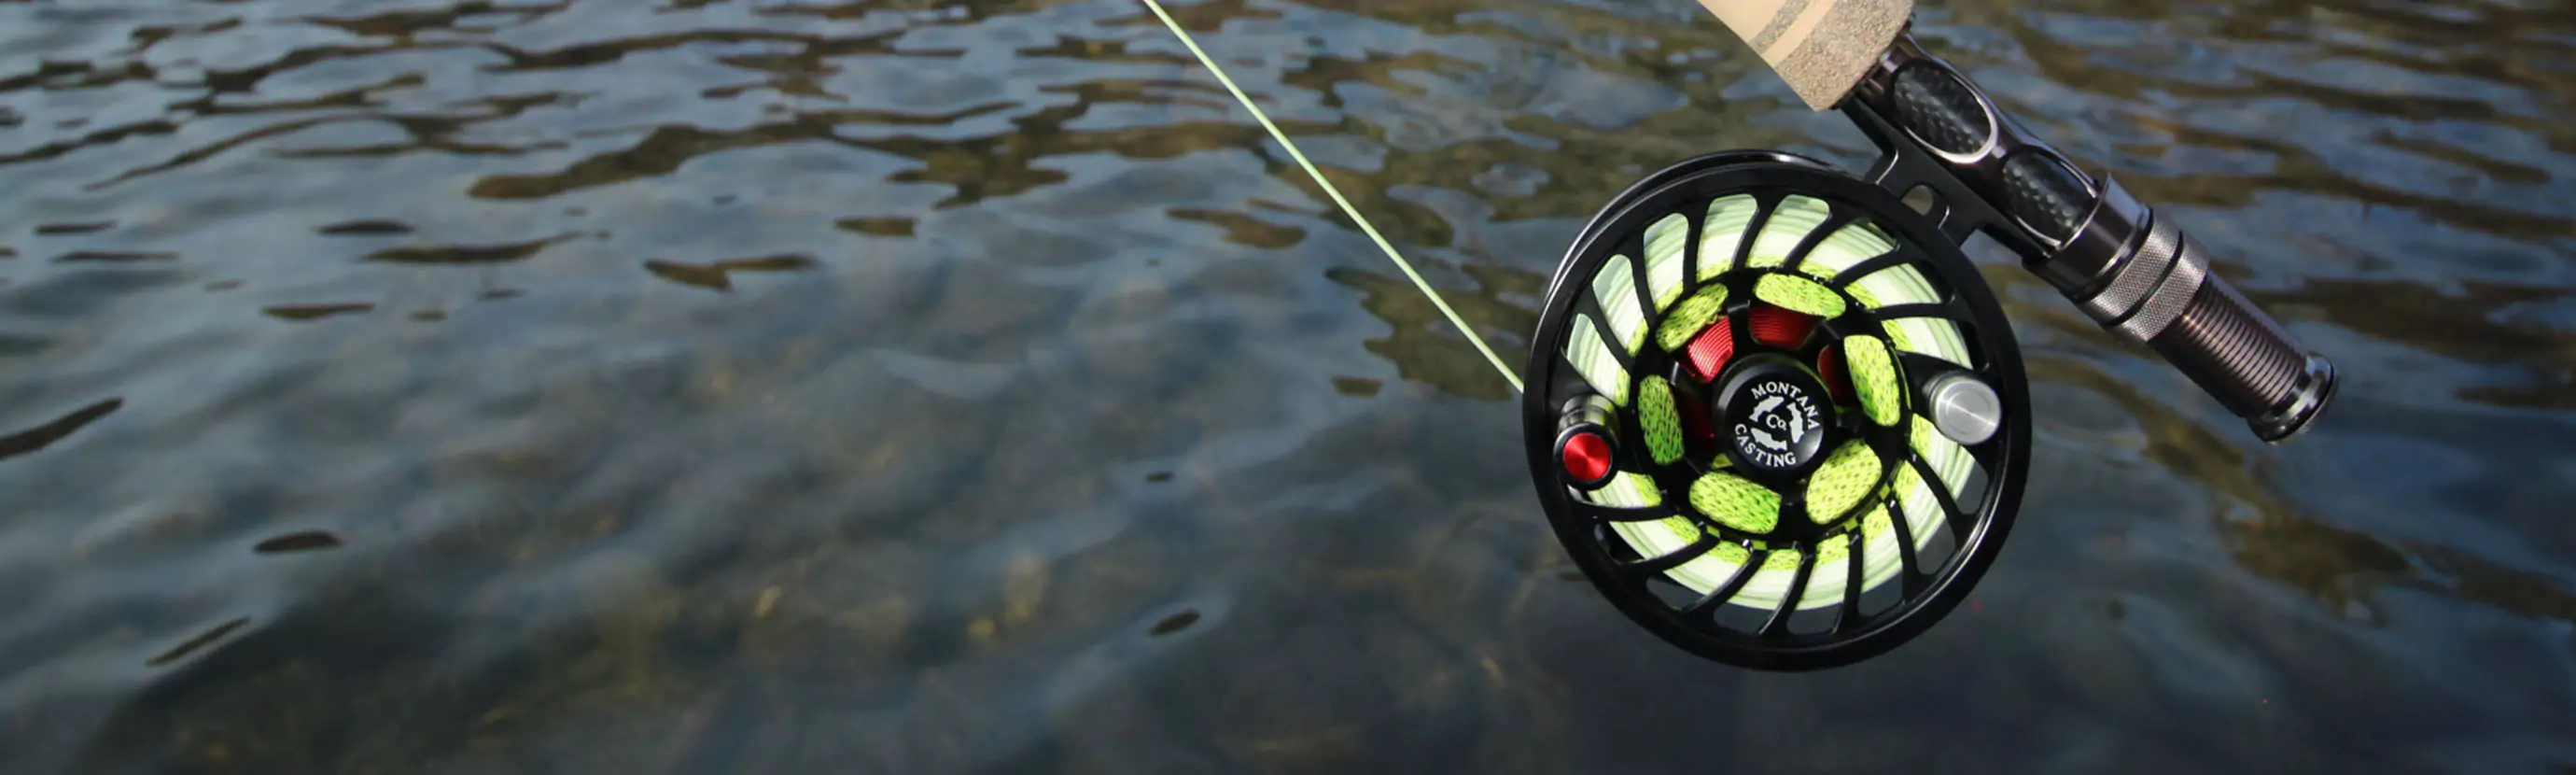 Get reel with Montana Casting Co.<sup>®</sup> fly fishing gear!